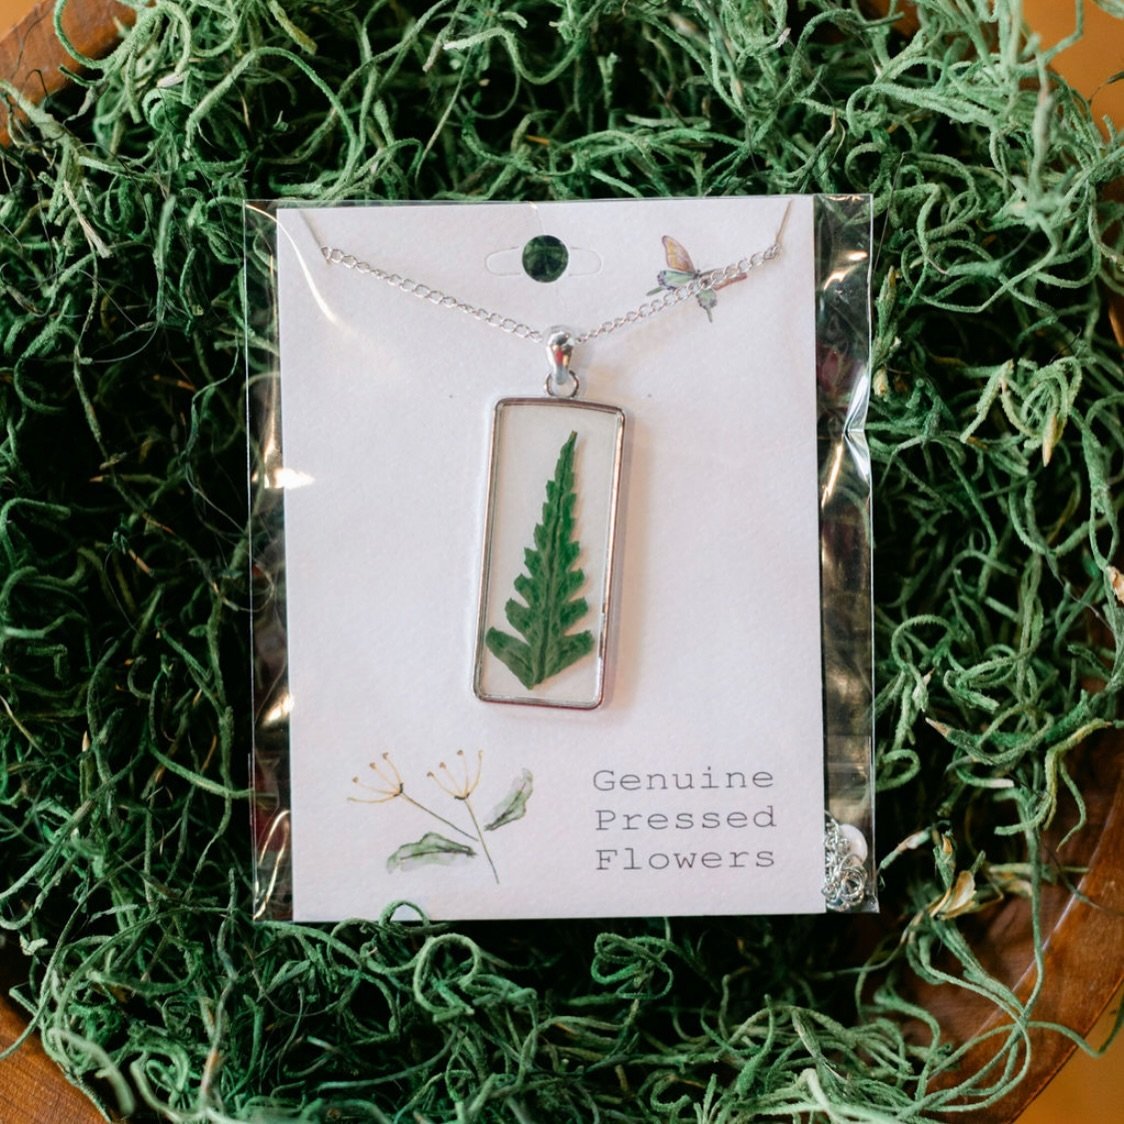 🌿 Cottage Fern Necklace $22 

Come shop with us Tues-Saturday 11-6 or online 24/7! 

#linkinbio #shop #shopping #freeshipping #jewelry #necklace #cottagecore #cottage #fern #plantmagic #plantlover #cute #love #green #columbusga #columbusgeorgia #geo